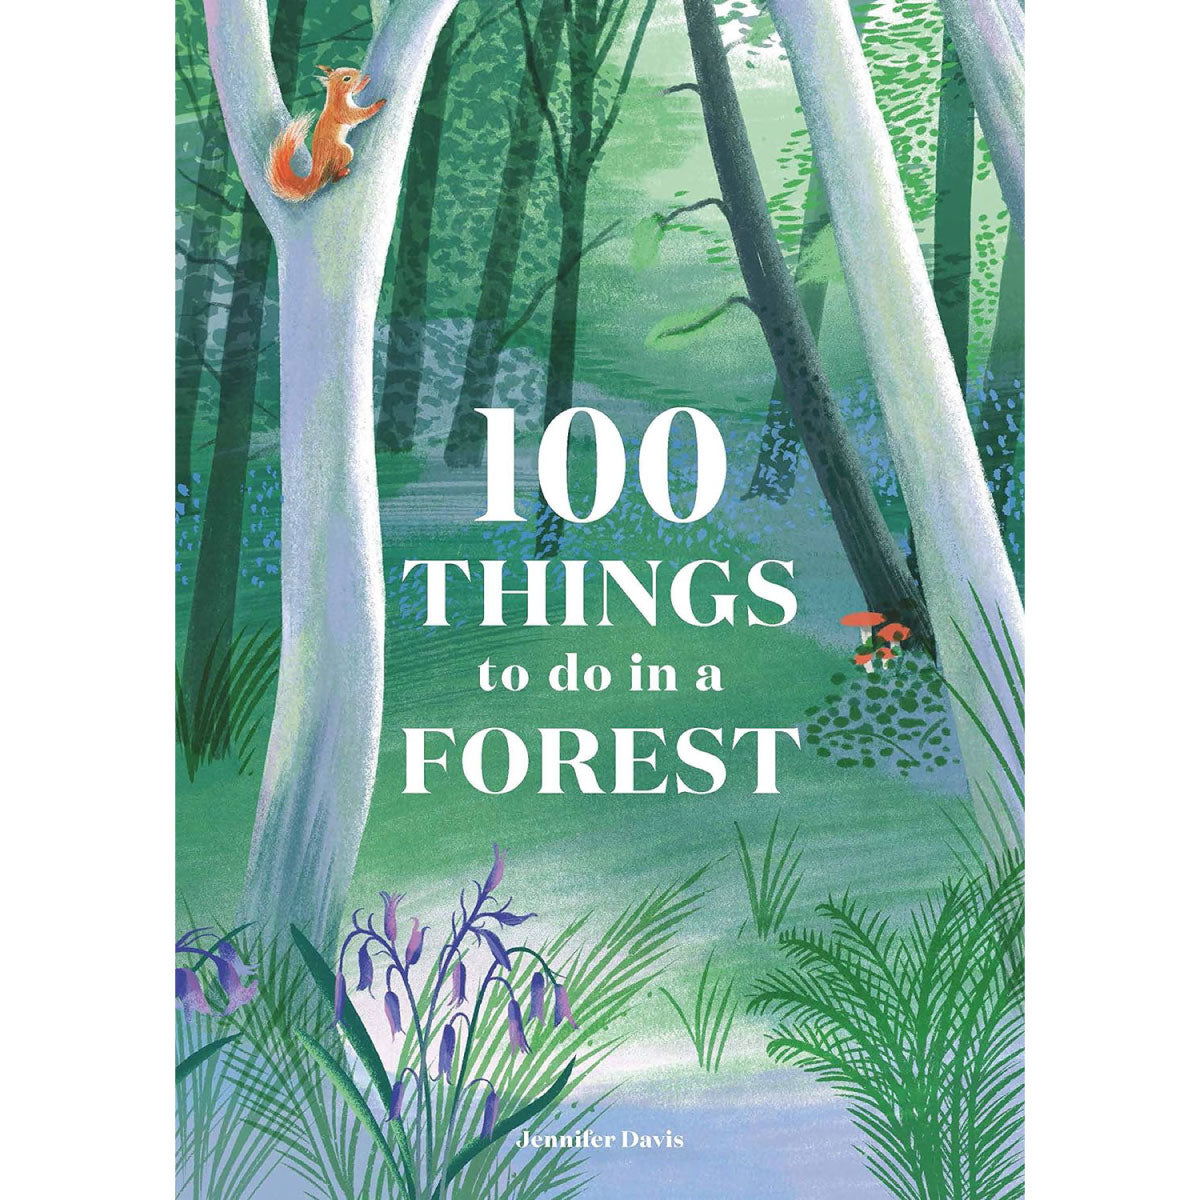 100 Things to do in a Forest by Jennifer Davis